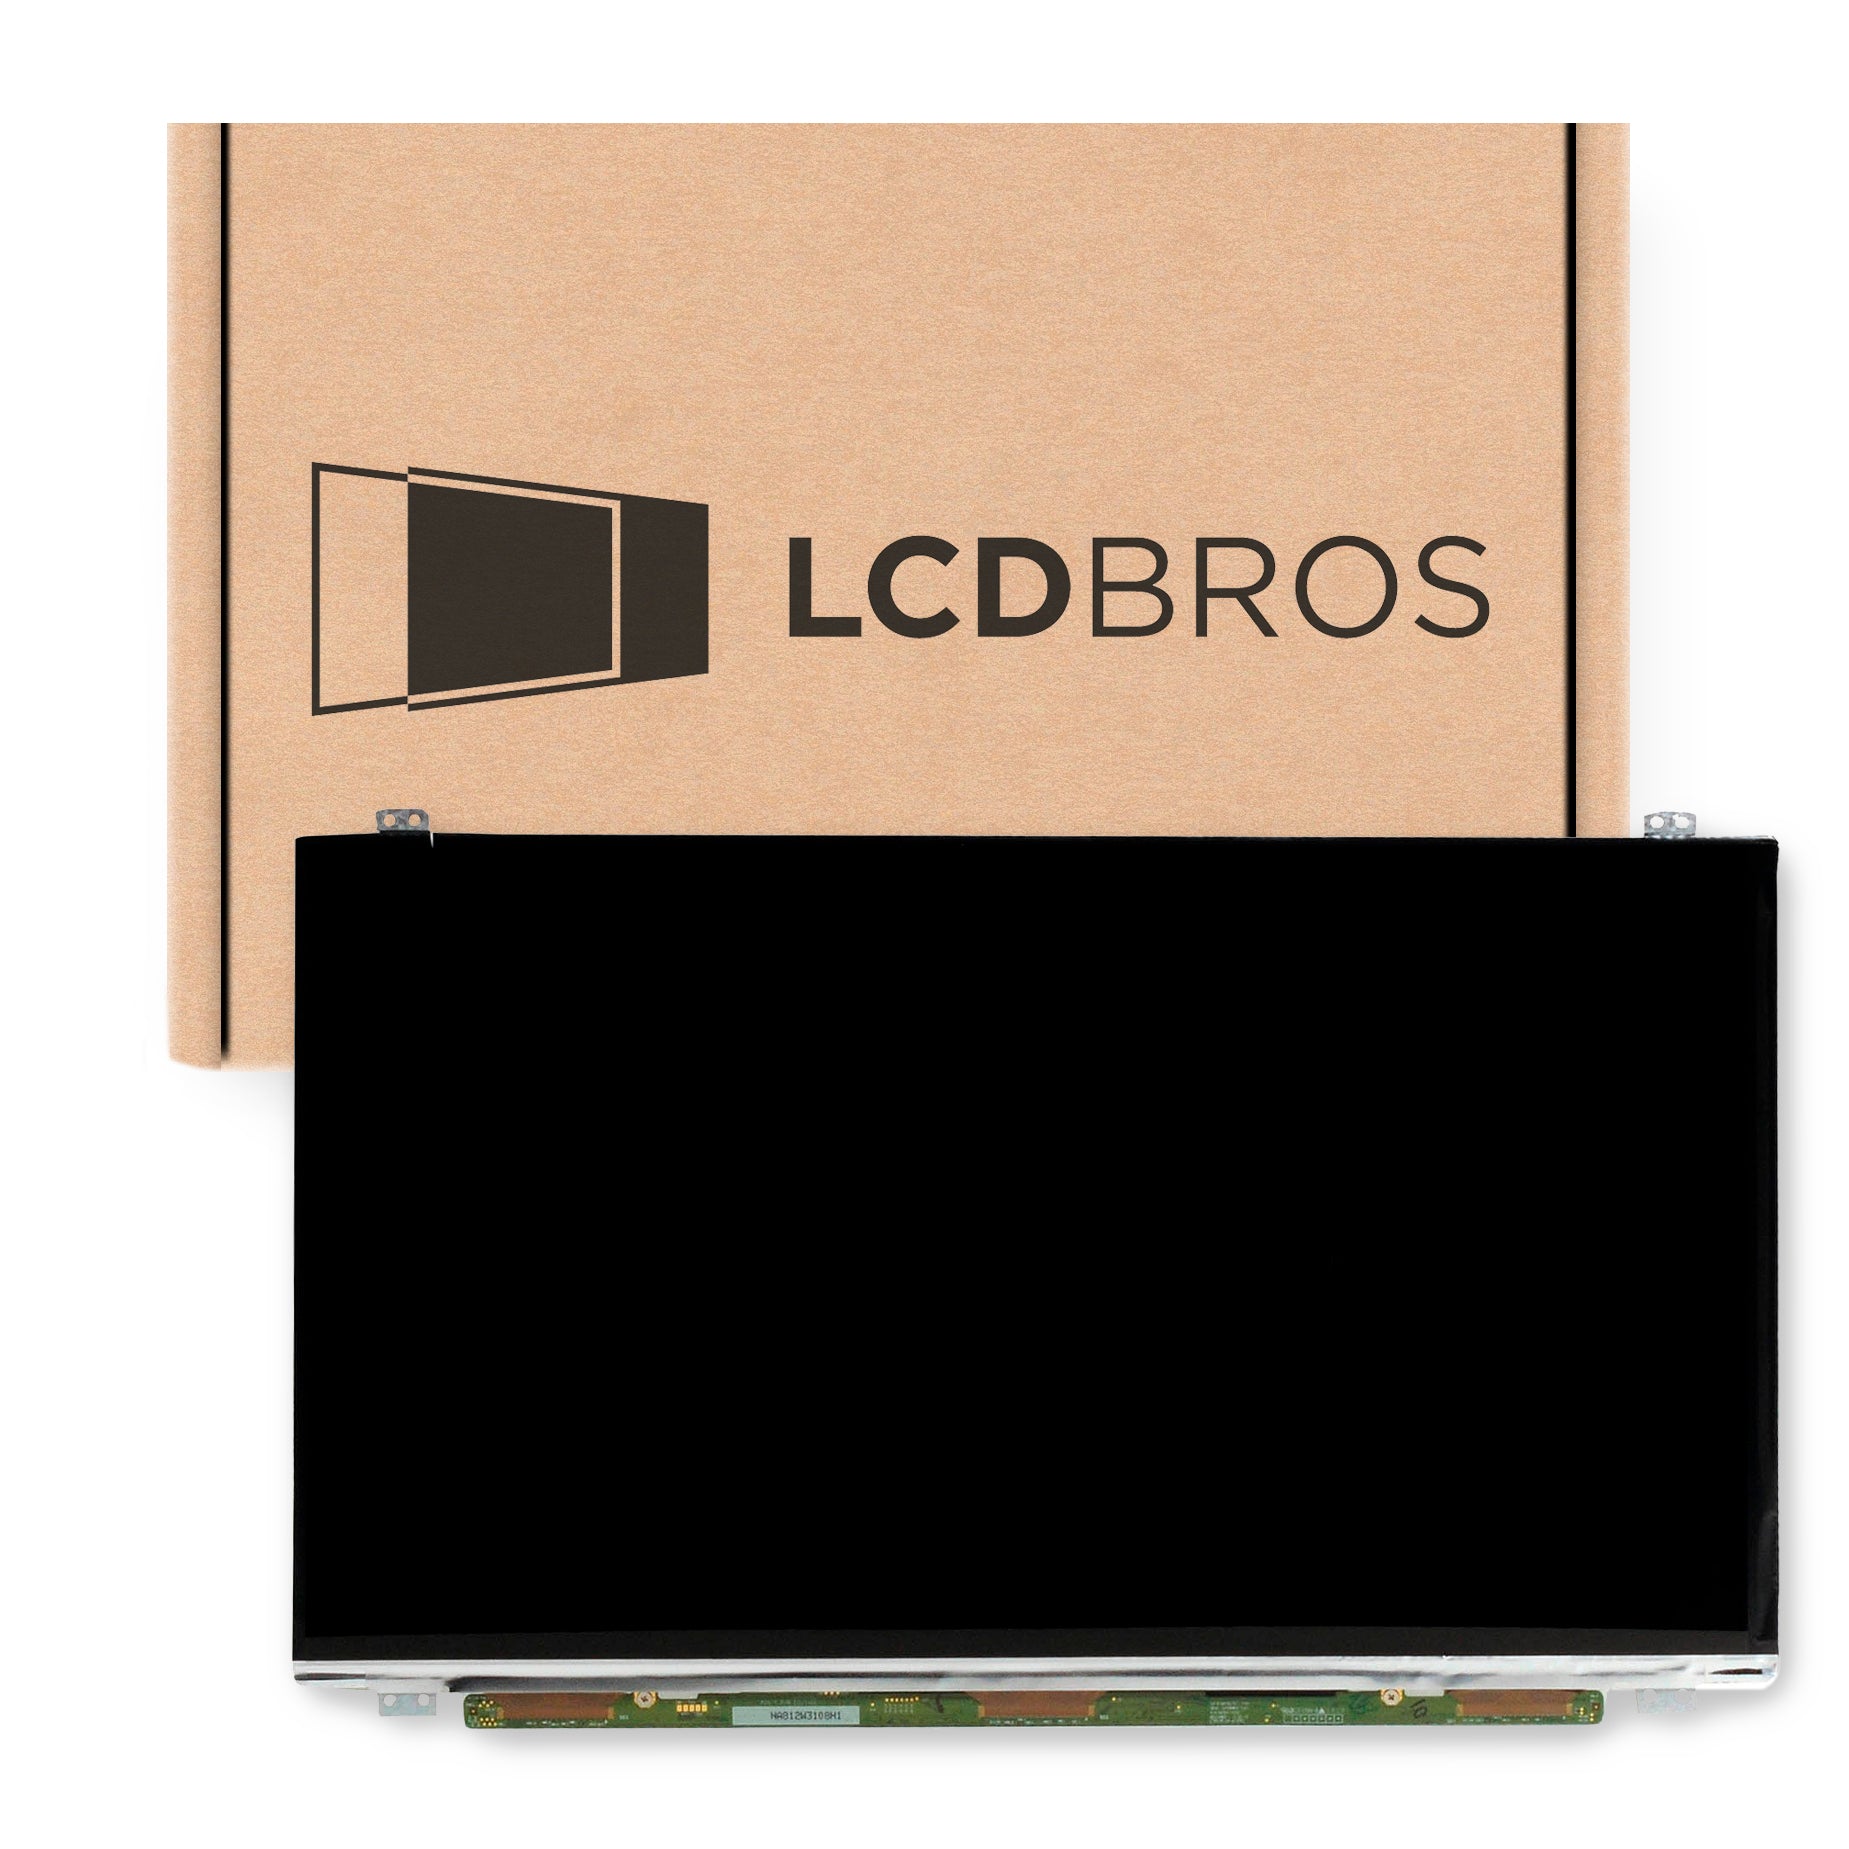 Replacement Screen For LP156WH3(TL)(BA) HD 1366x768 Glossy LCD LED Display